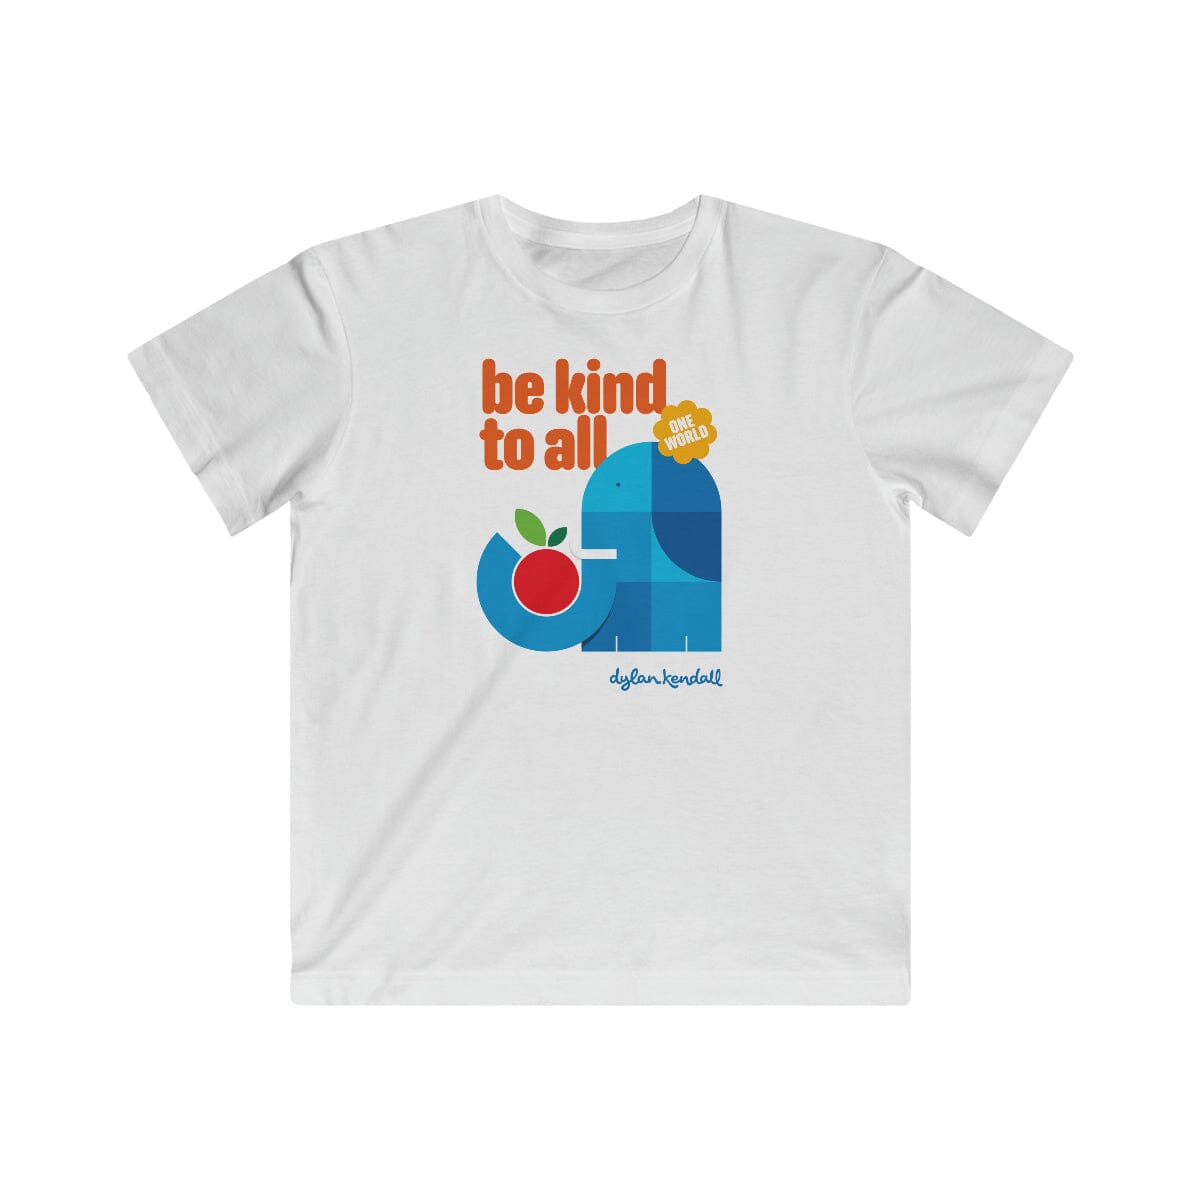 Be Kids Kind All! To | T-Shirt